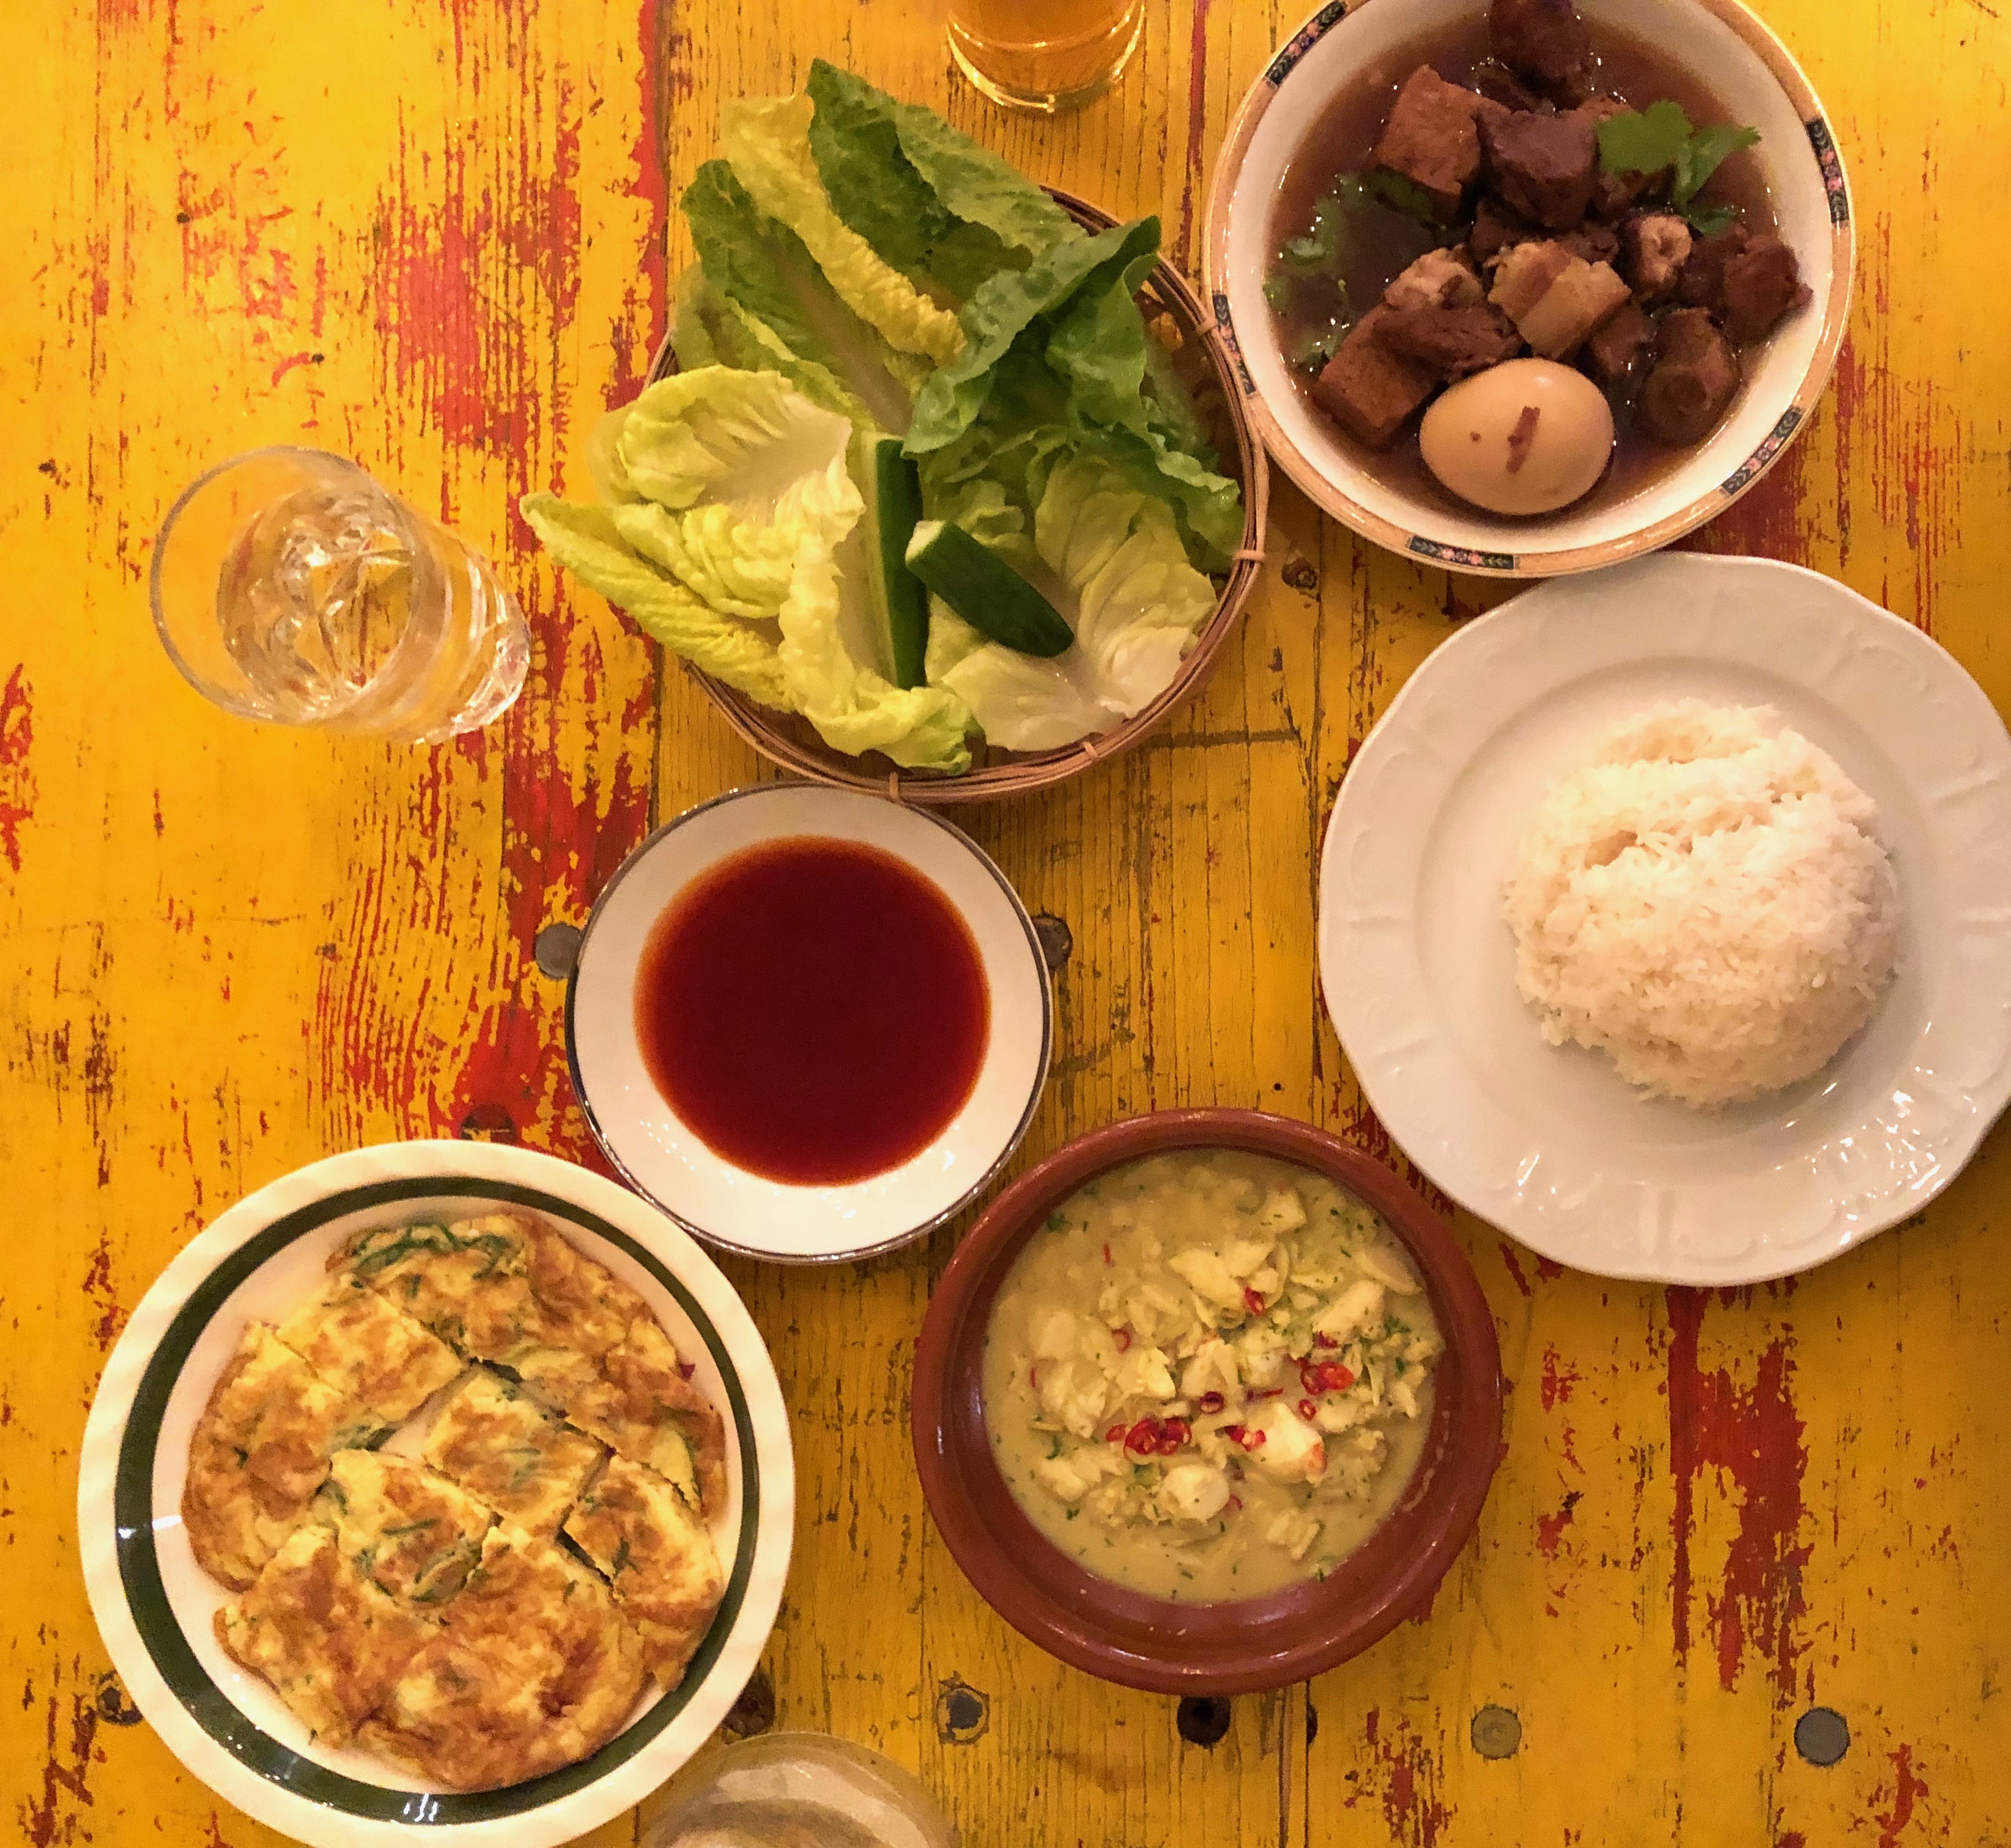 A spread of dishes, including pork belly in a dark soy sauce, green lettuce leaves, a mound of white rice, and a sliced omelet sit over a burnished wood table